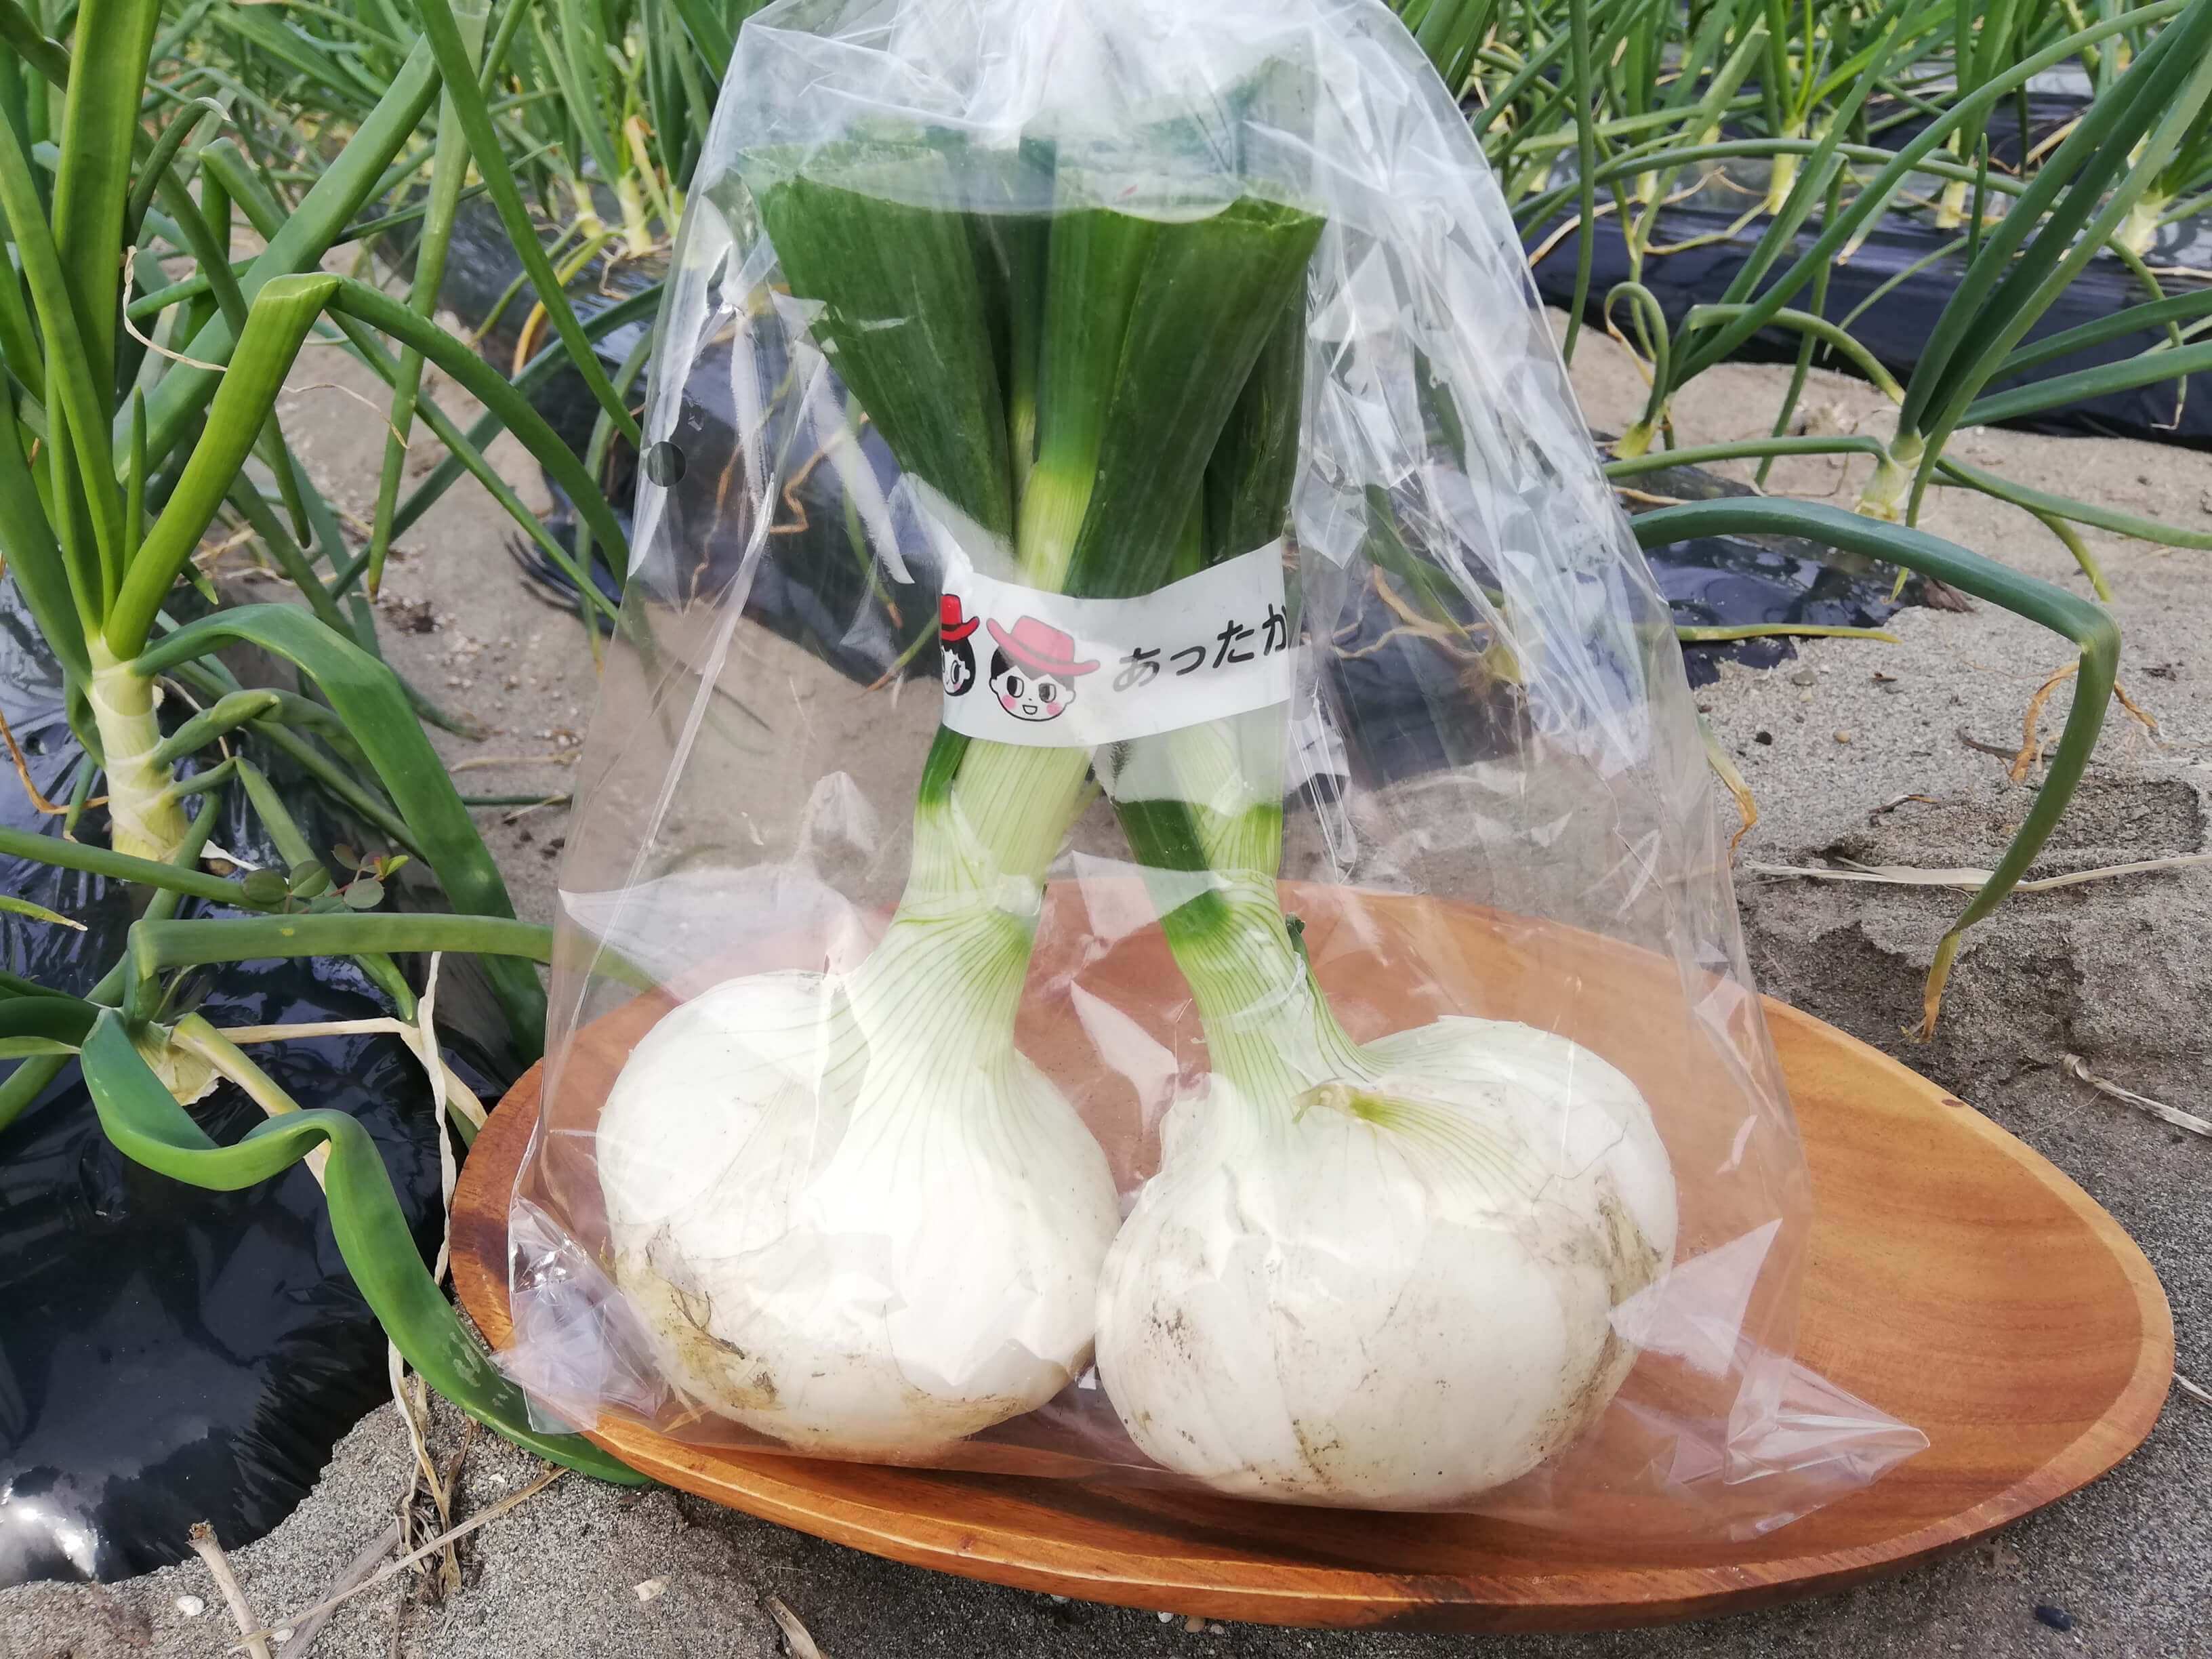 White onion with leaves from Shinohara (white, 2 pieces)